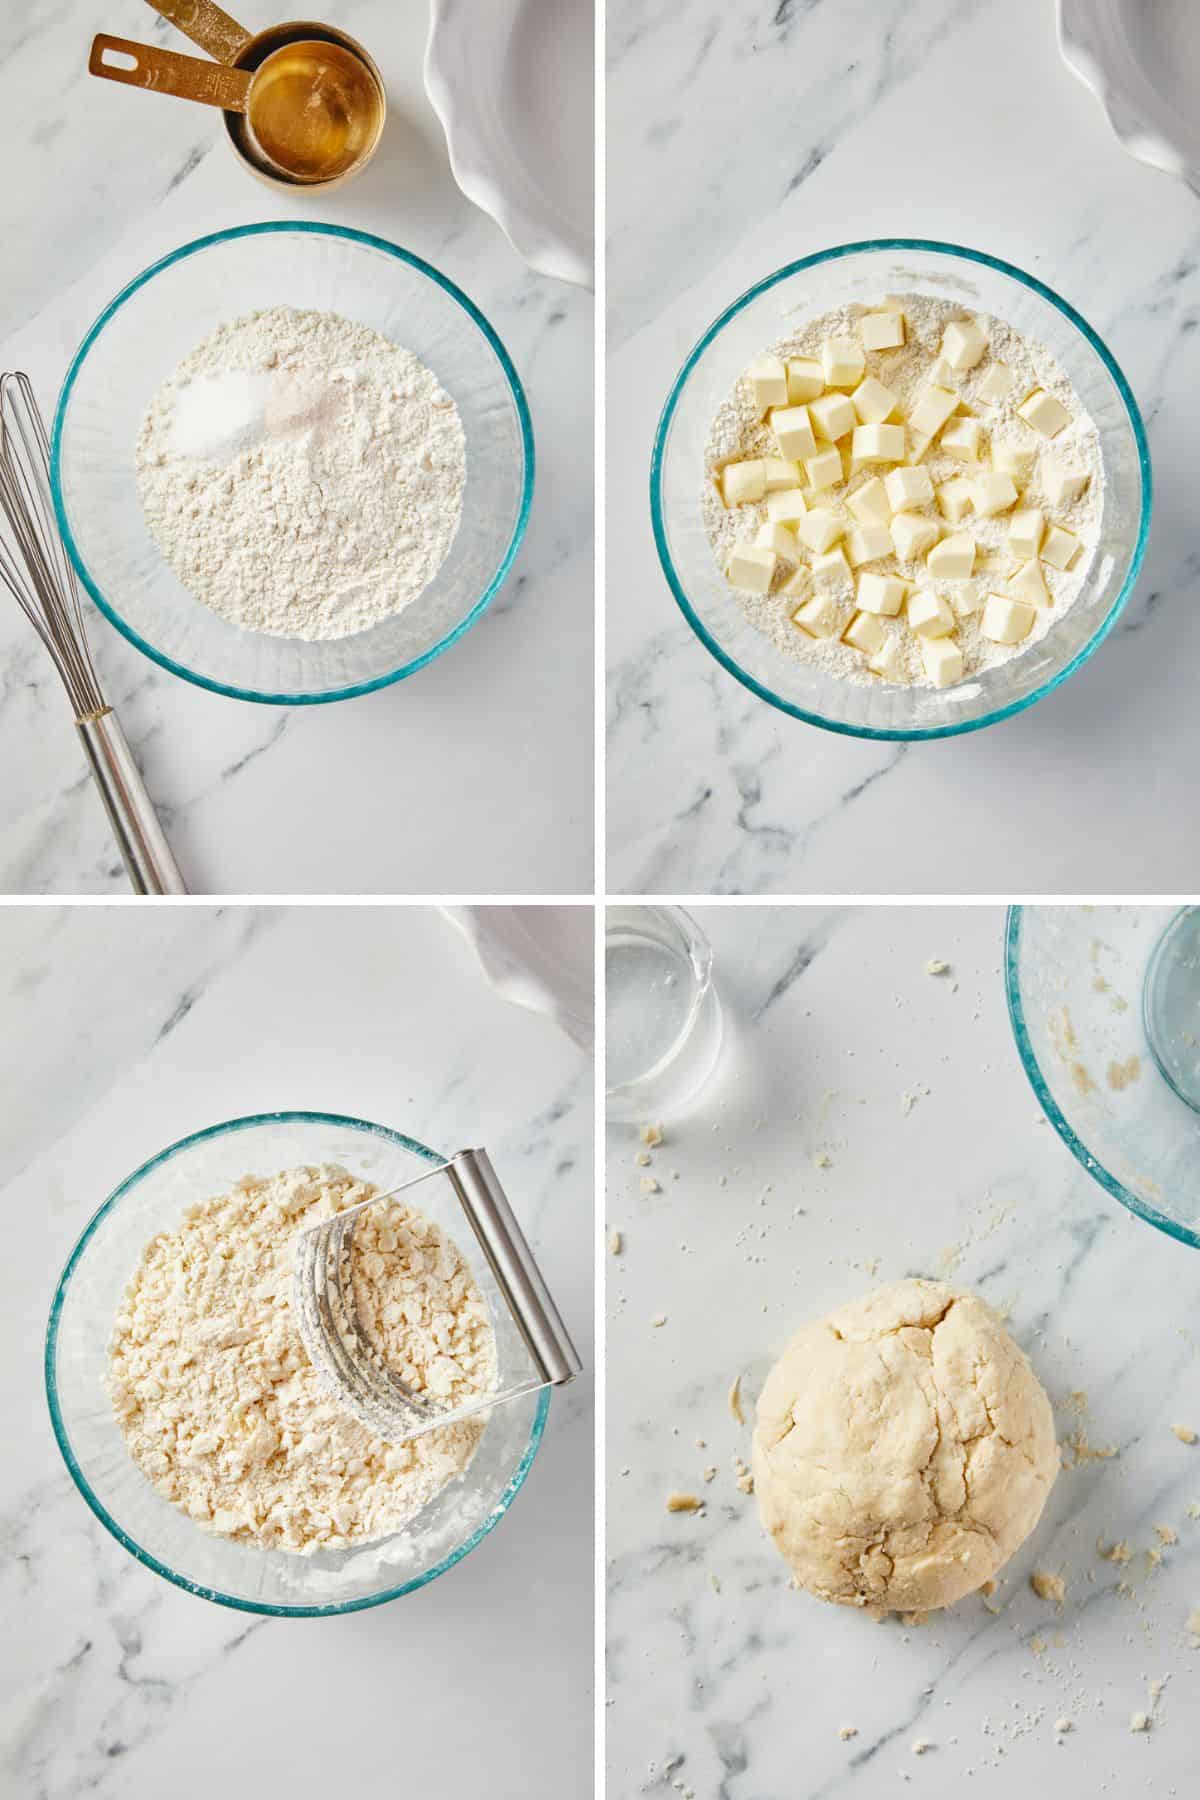 A collage of images showing mixing up the pie dough to make a flaky pie crust.